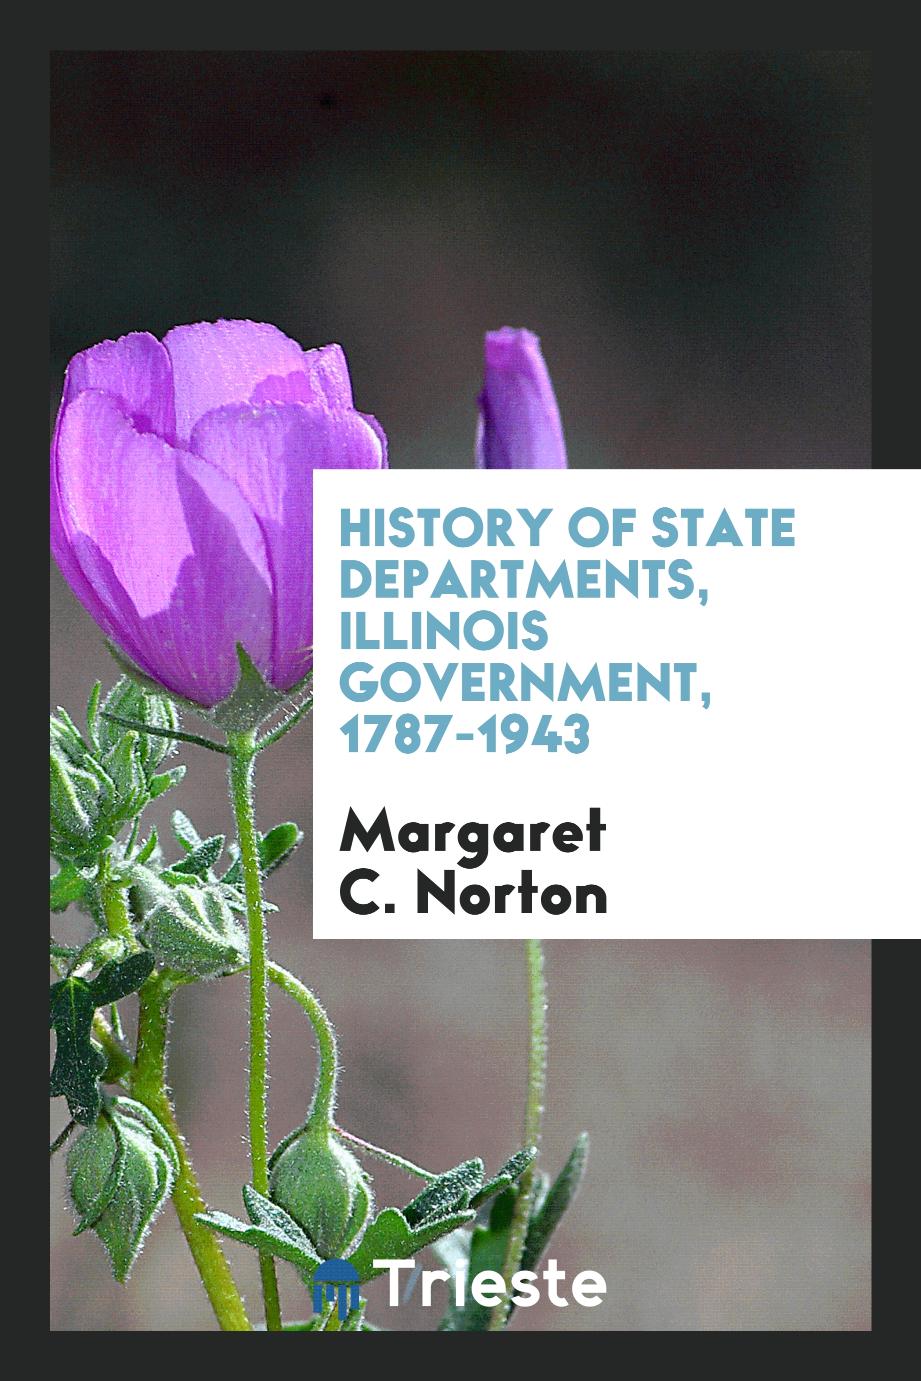 History of State Departments, Illinois Government, 1787-1943